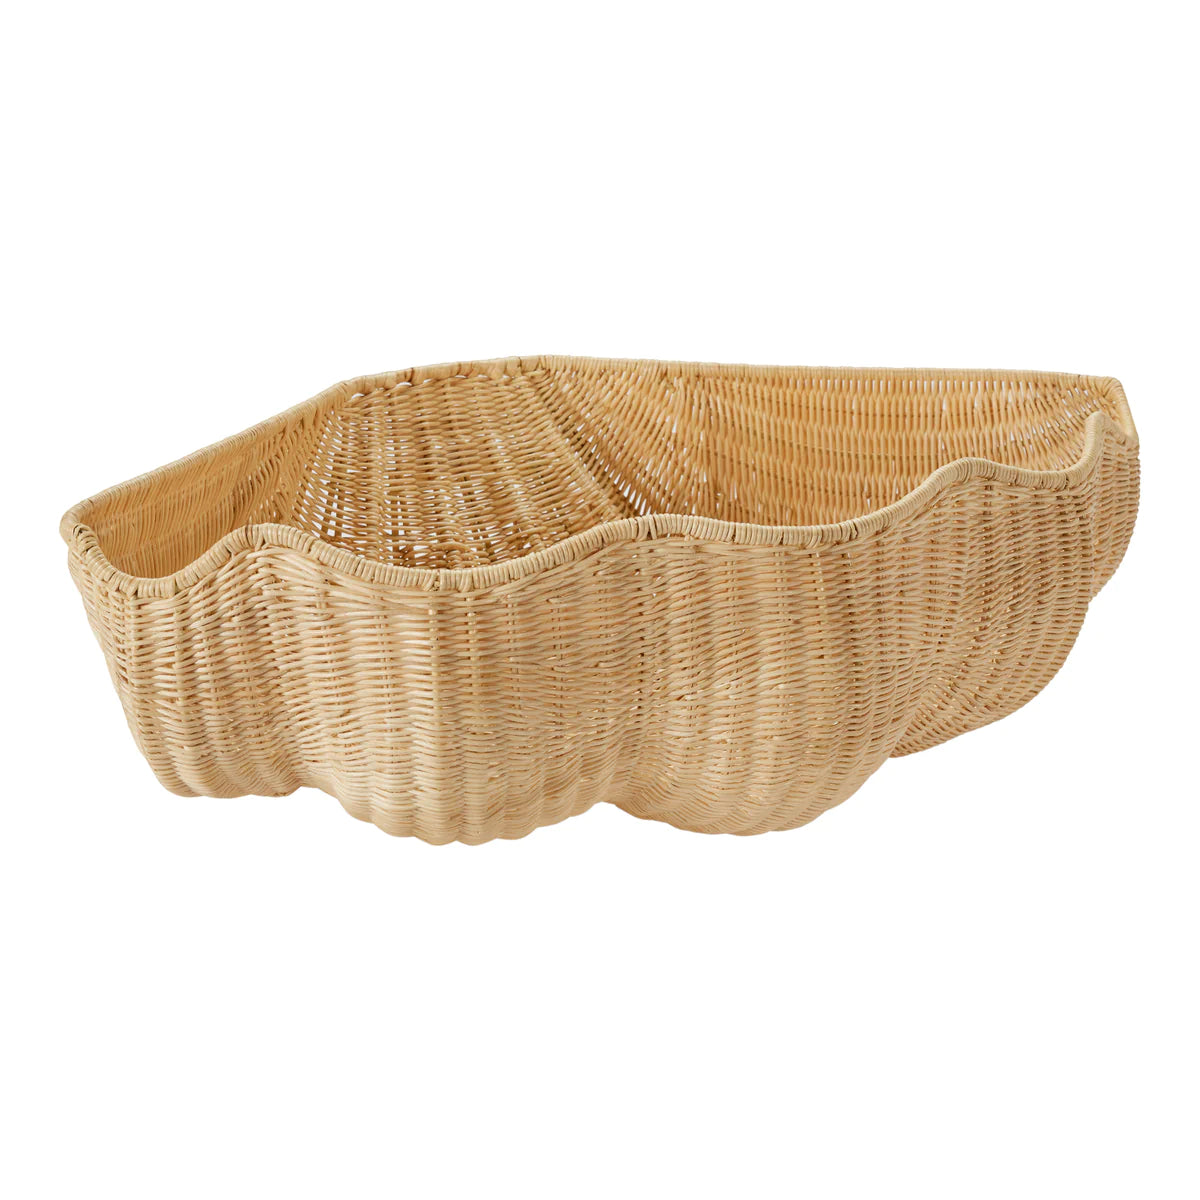 Amanda Lindroth - Wicker Clam Shell - Large